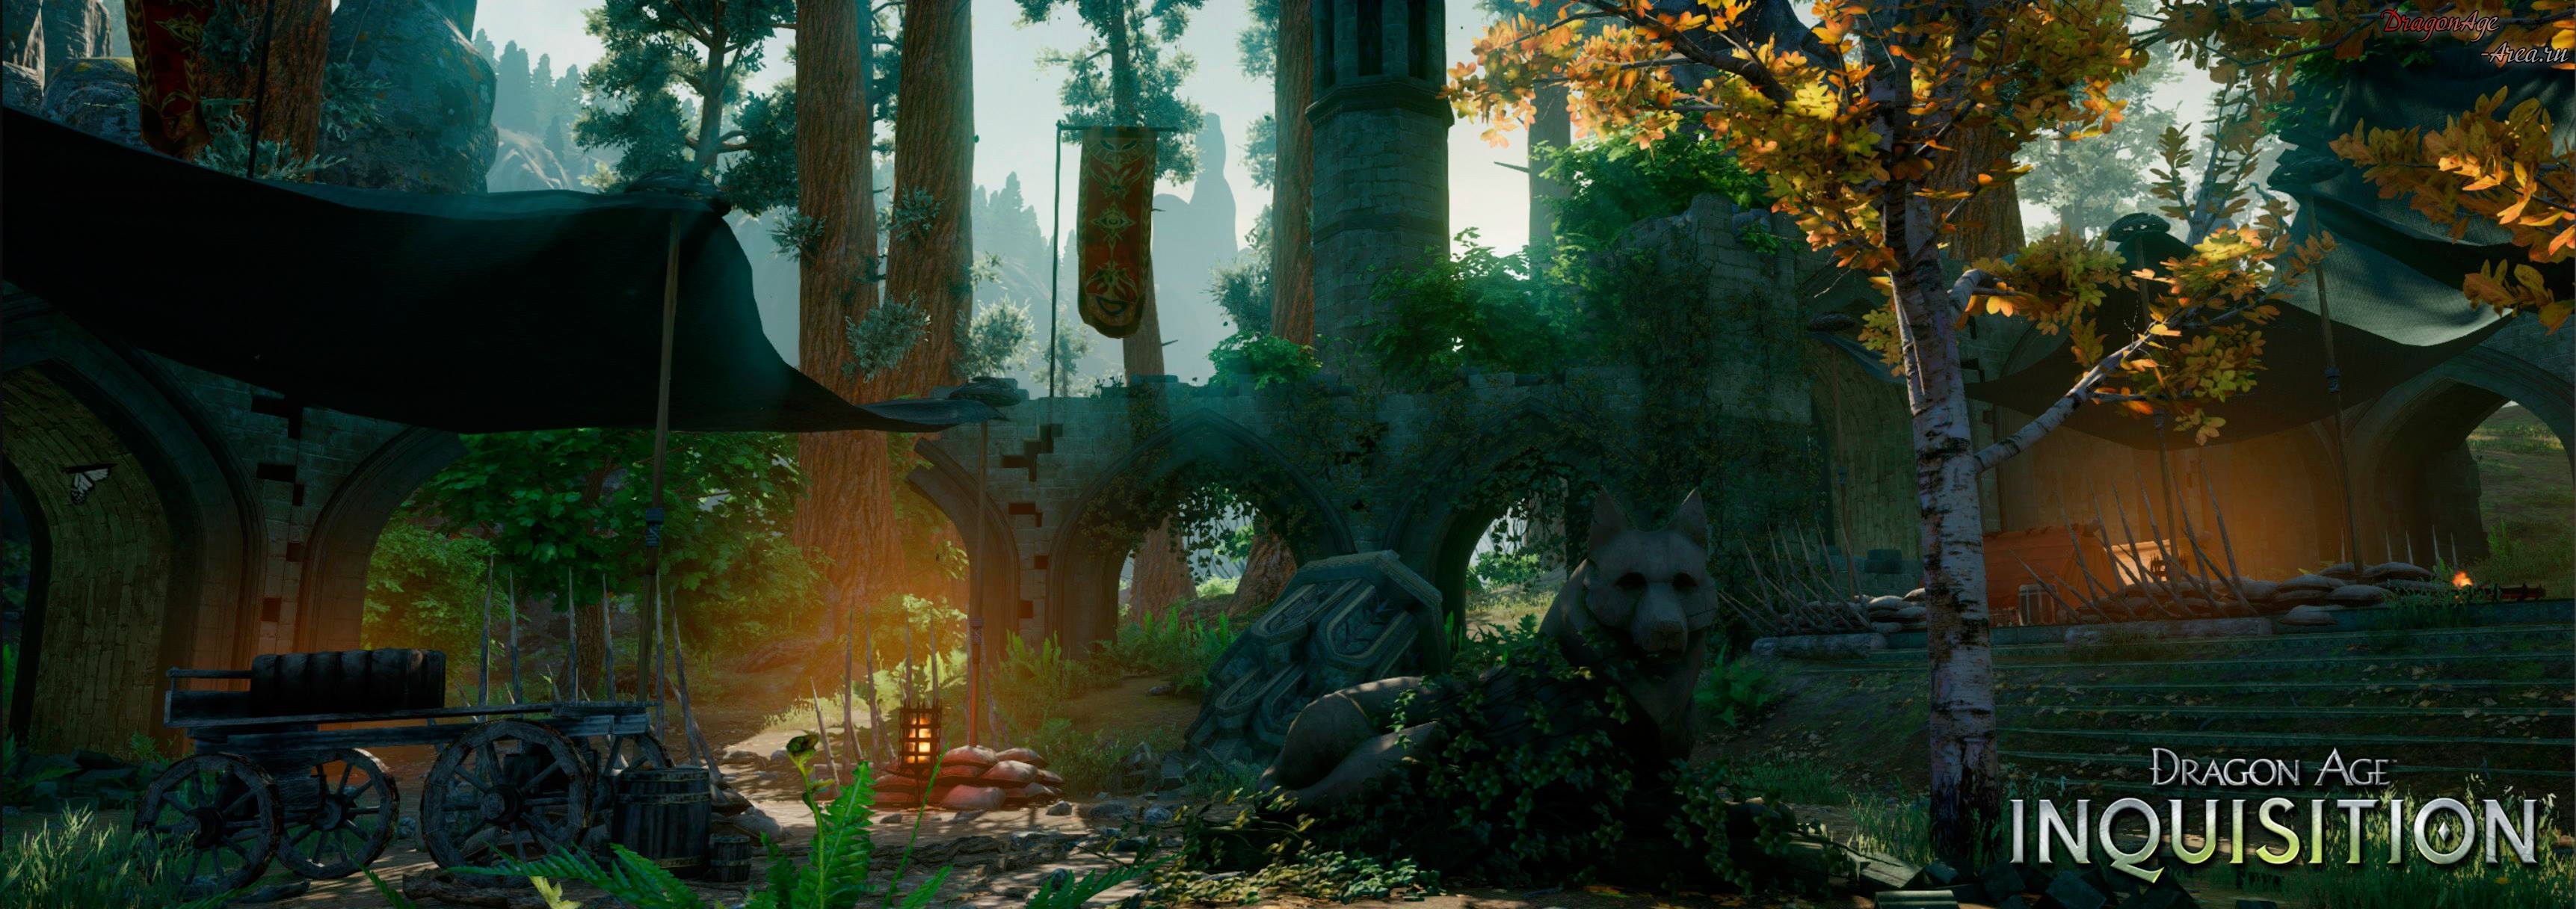 dragon_age_inquistion_forest_screen_03.jpg